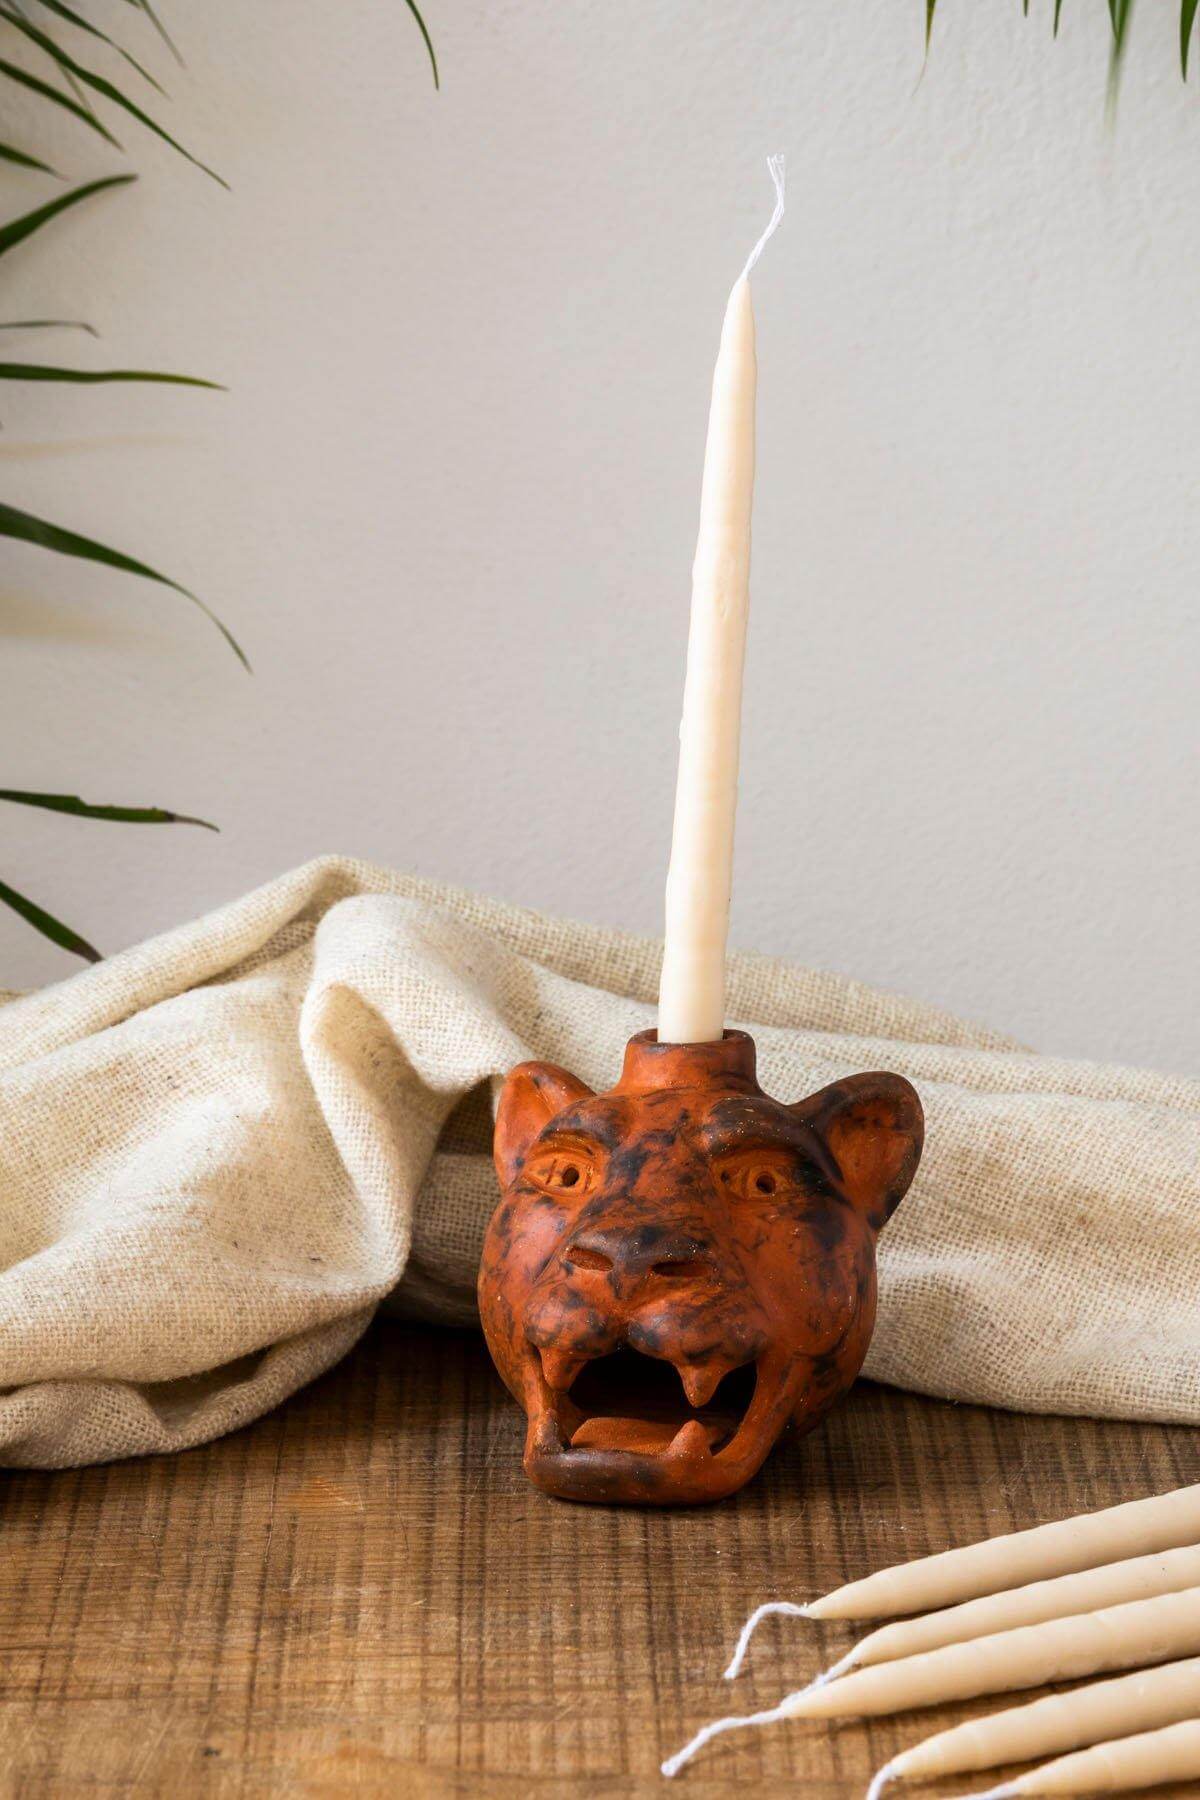 Jaguar Head Clay Candle Holder by Andrea Garcia - Wool+Clay